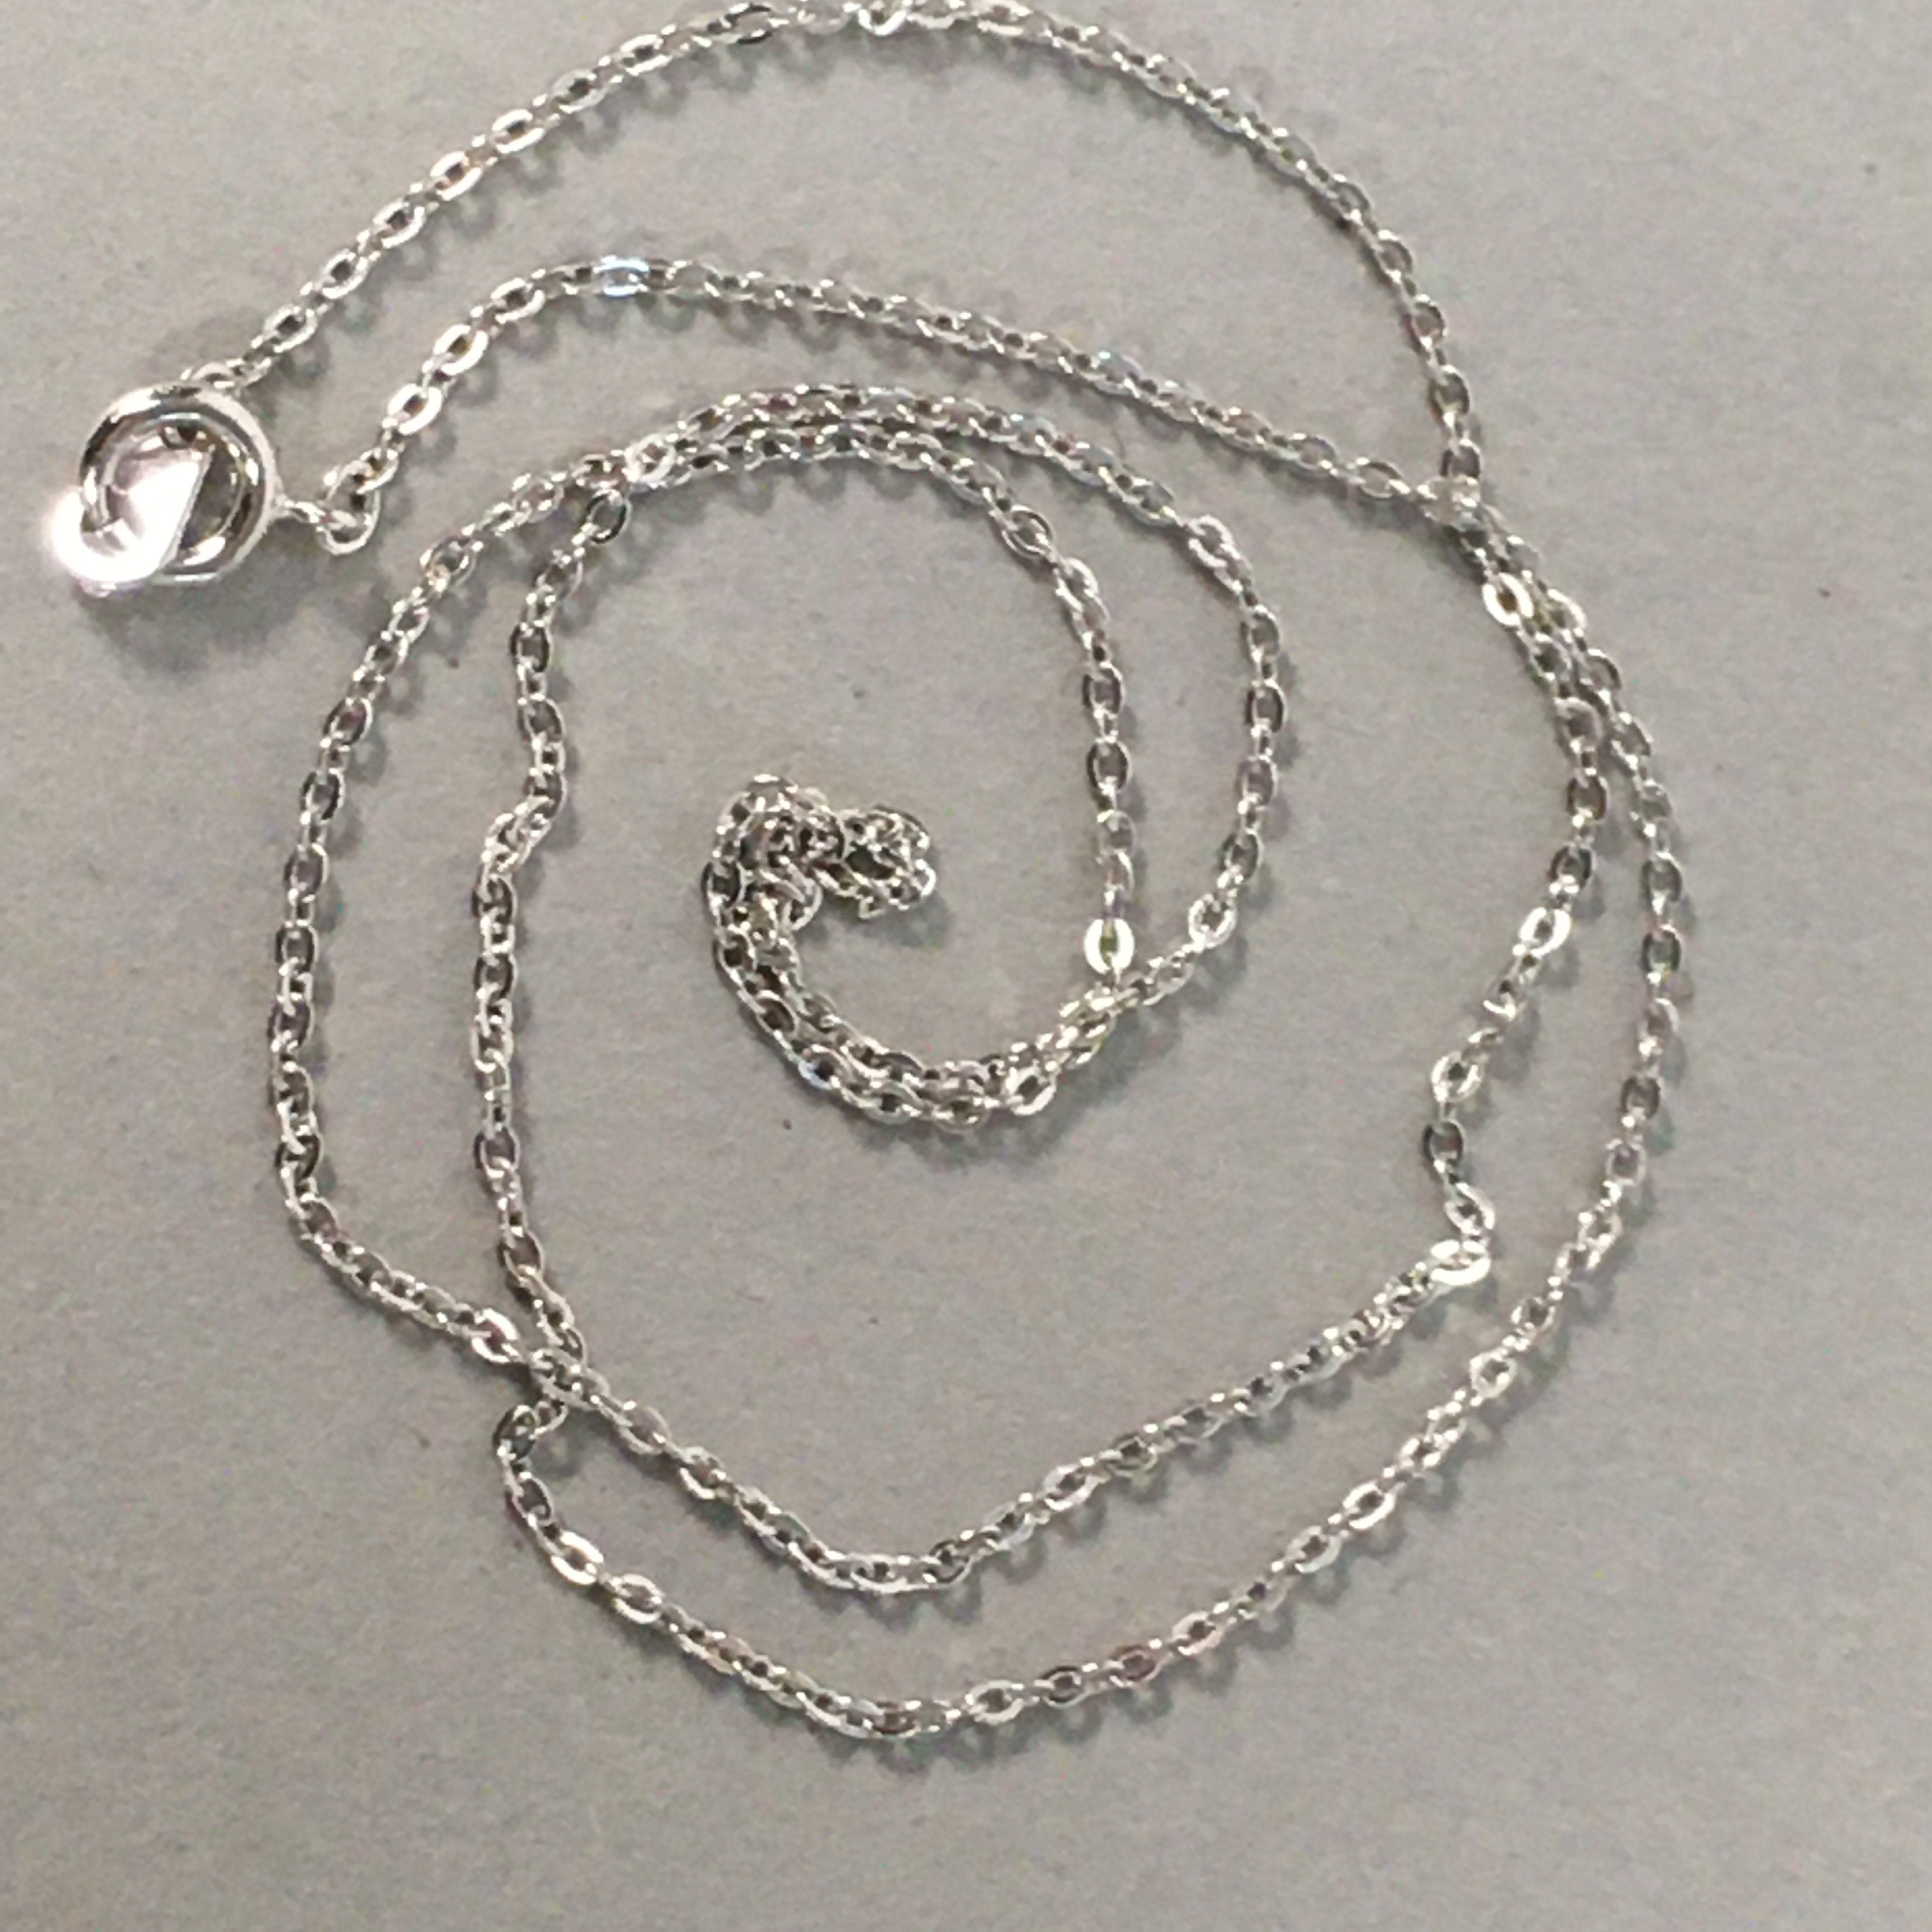 Japanese Necklace Vtg 45cm Long Silver Plated Chain NS Mark JK47